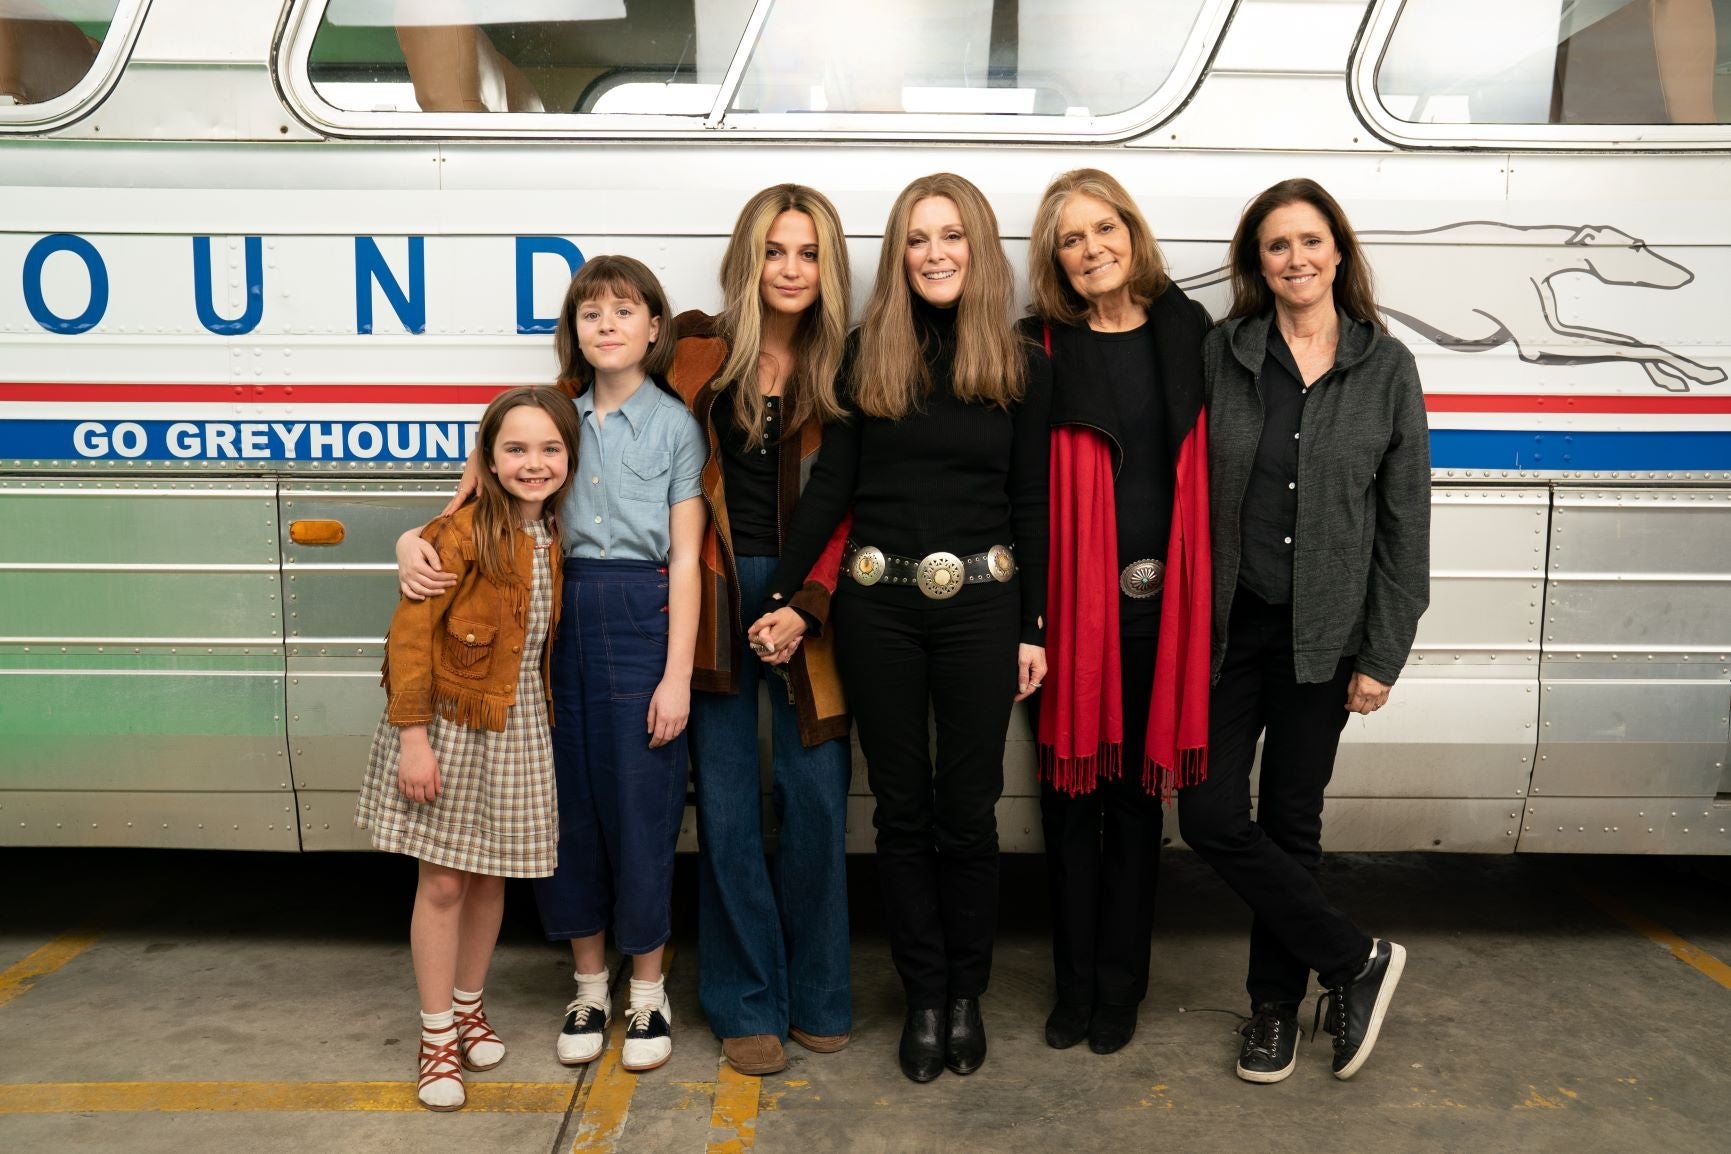 The six women stand in front of a Greyhound bus, many of them with long brown hair parted down the middle like Steinem’s